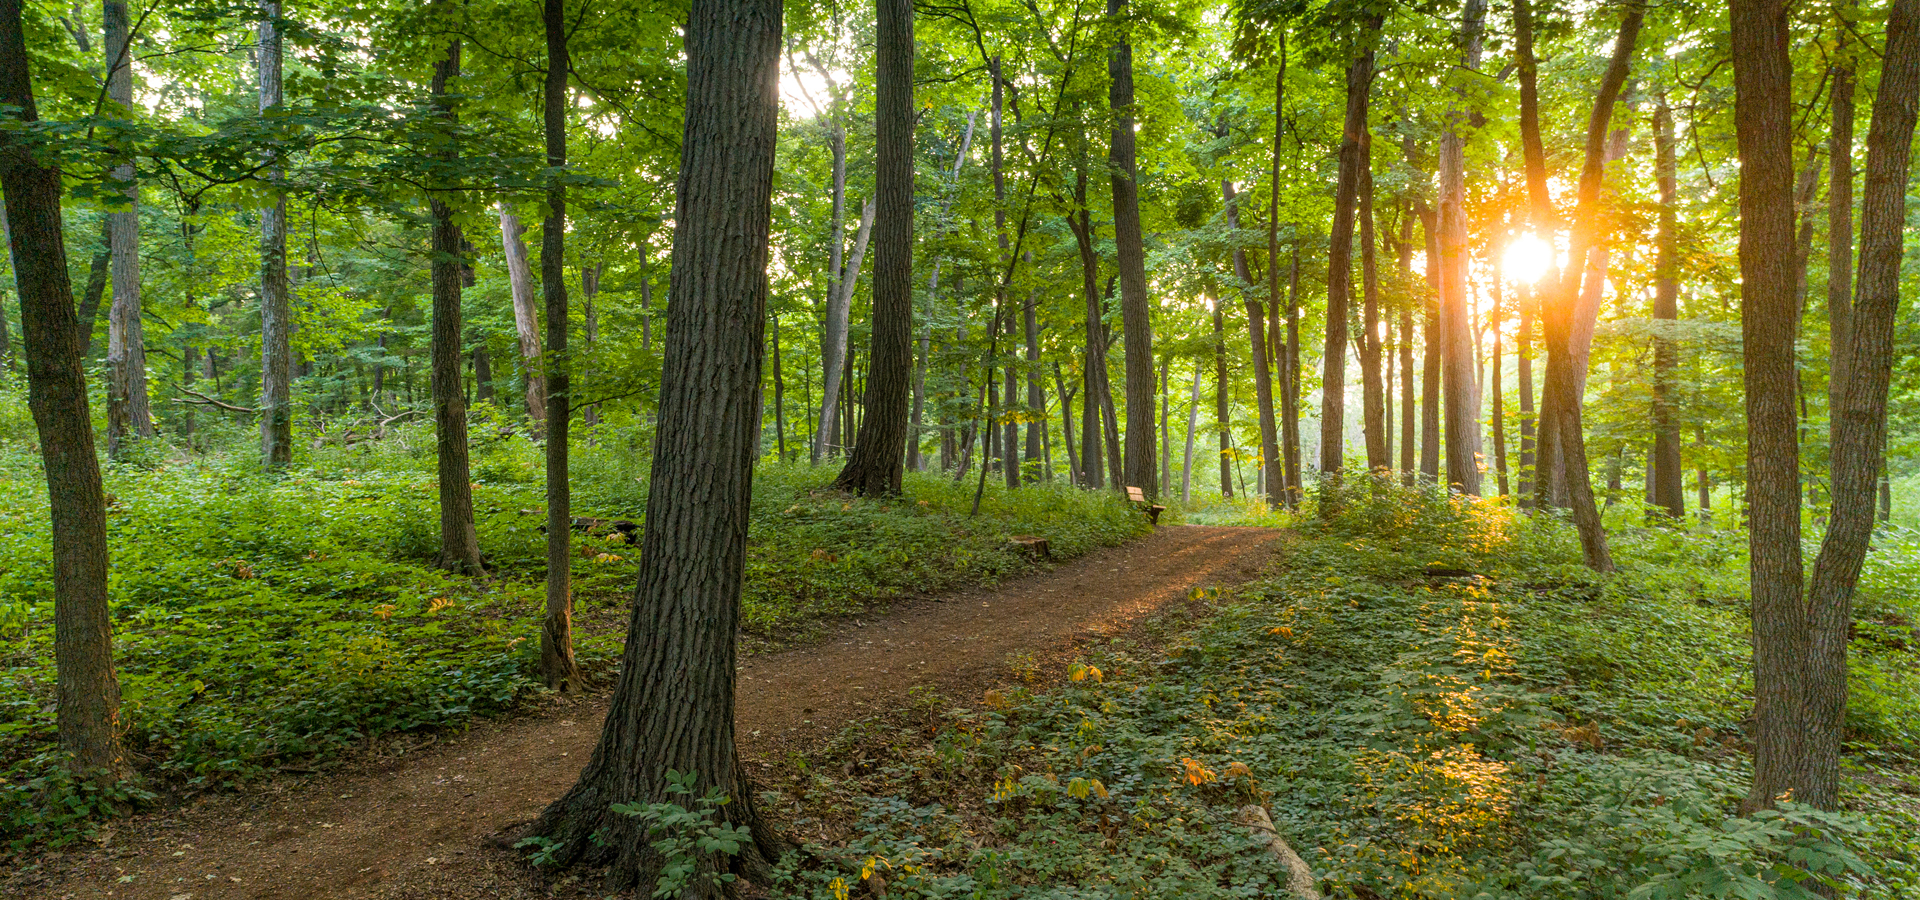 Summer path through the woods at sunrise.